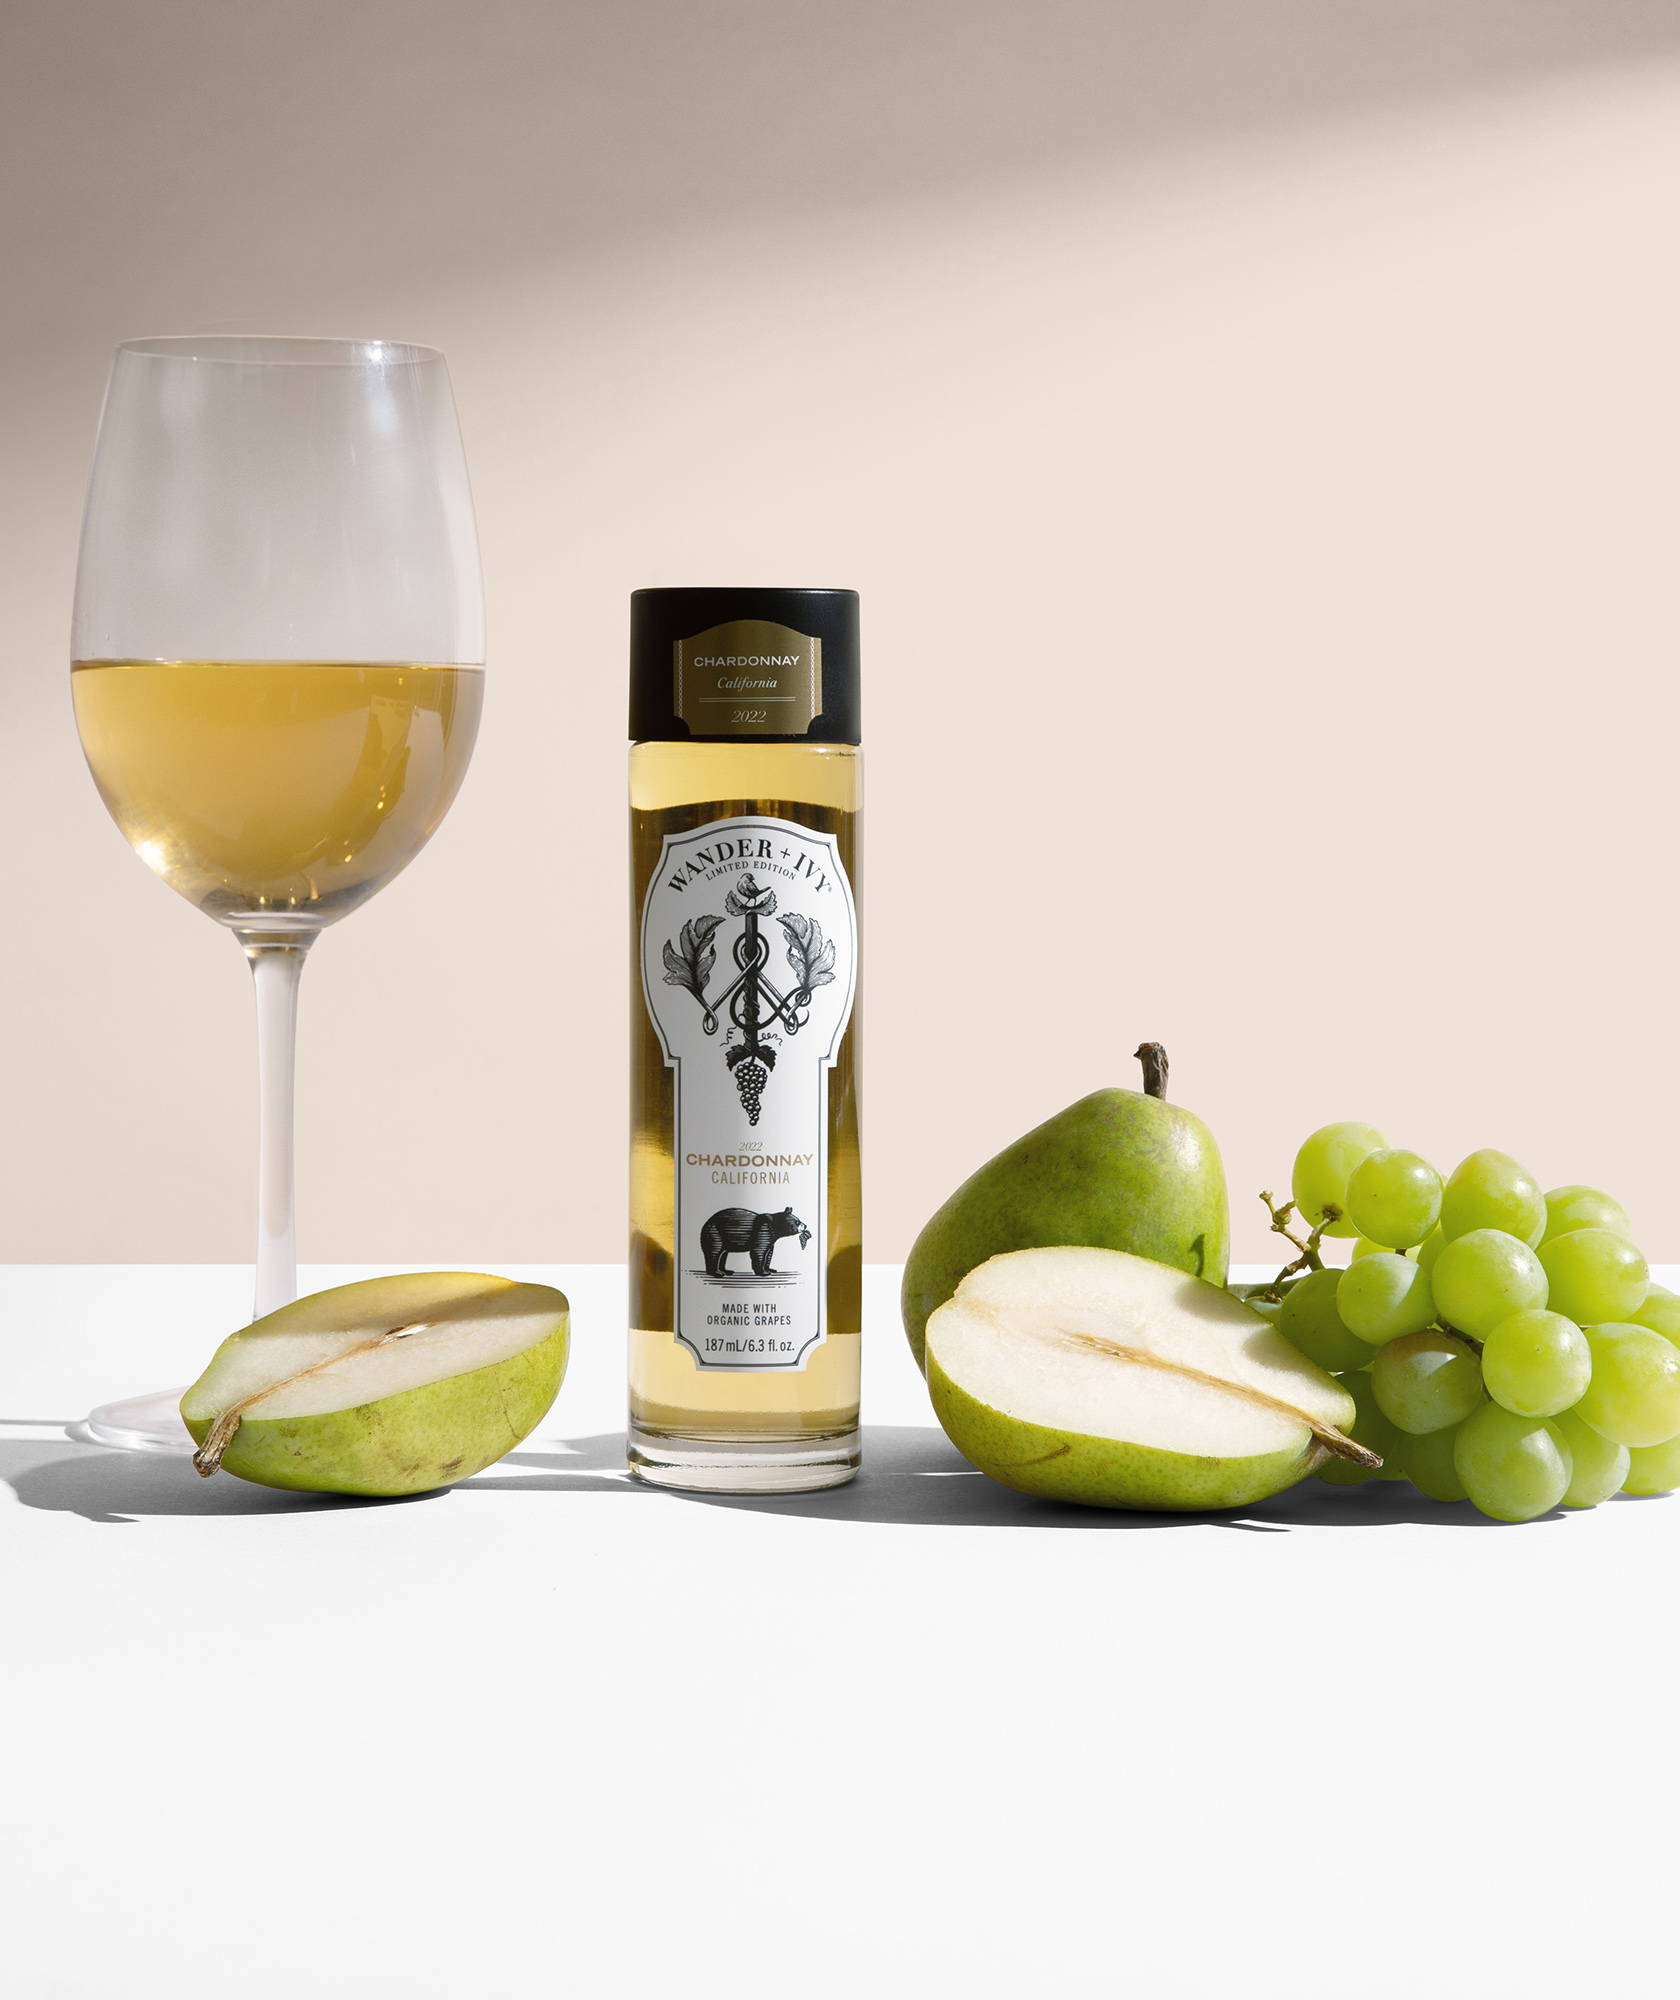 A single-serve bottle of Chardonnay next to a halved pear, bunch of white grapes, and a filled wine glass